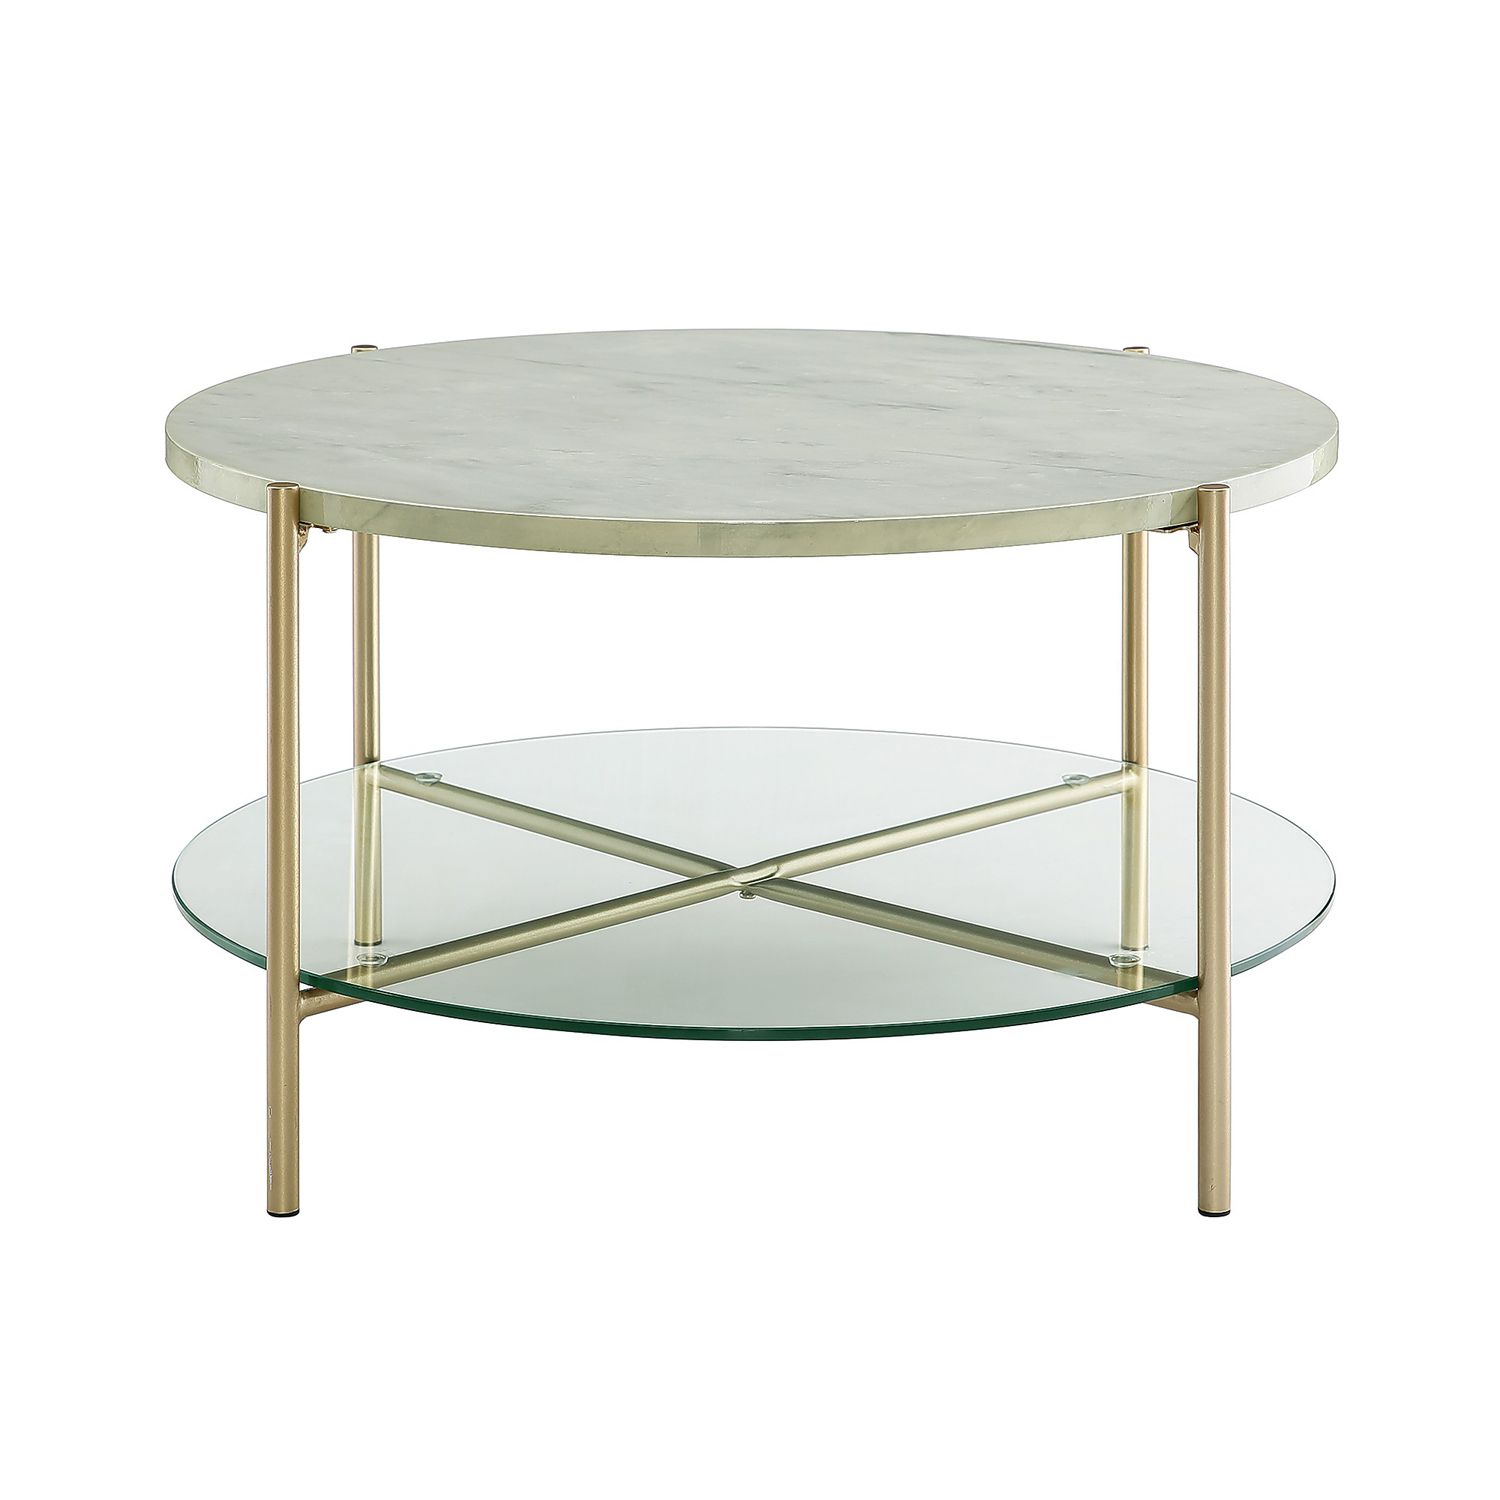 Faux Marble Round Coffee Table – Pier1 With Modern Round Faux Marble Coffee Tables (Gallery 19 of 20)